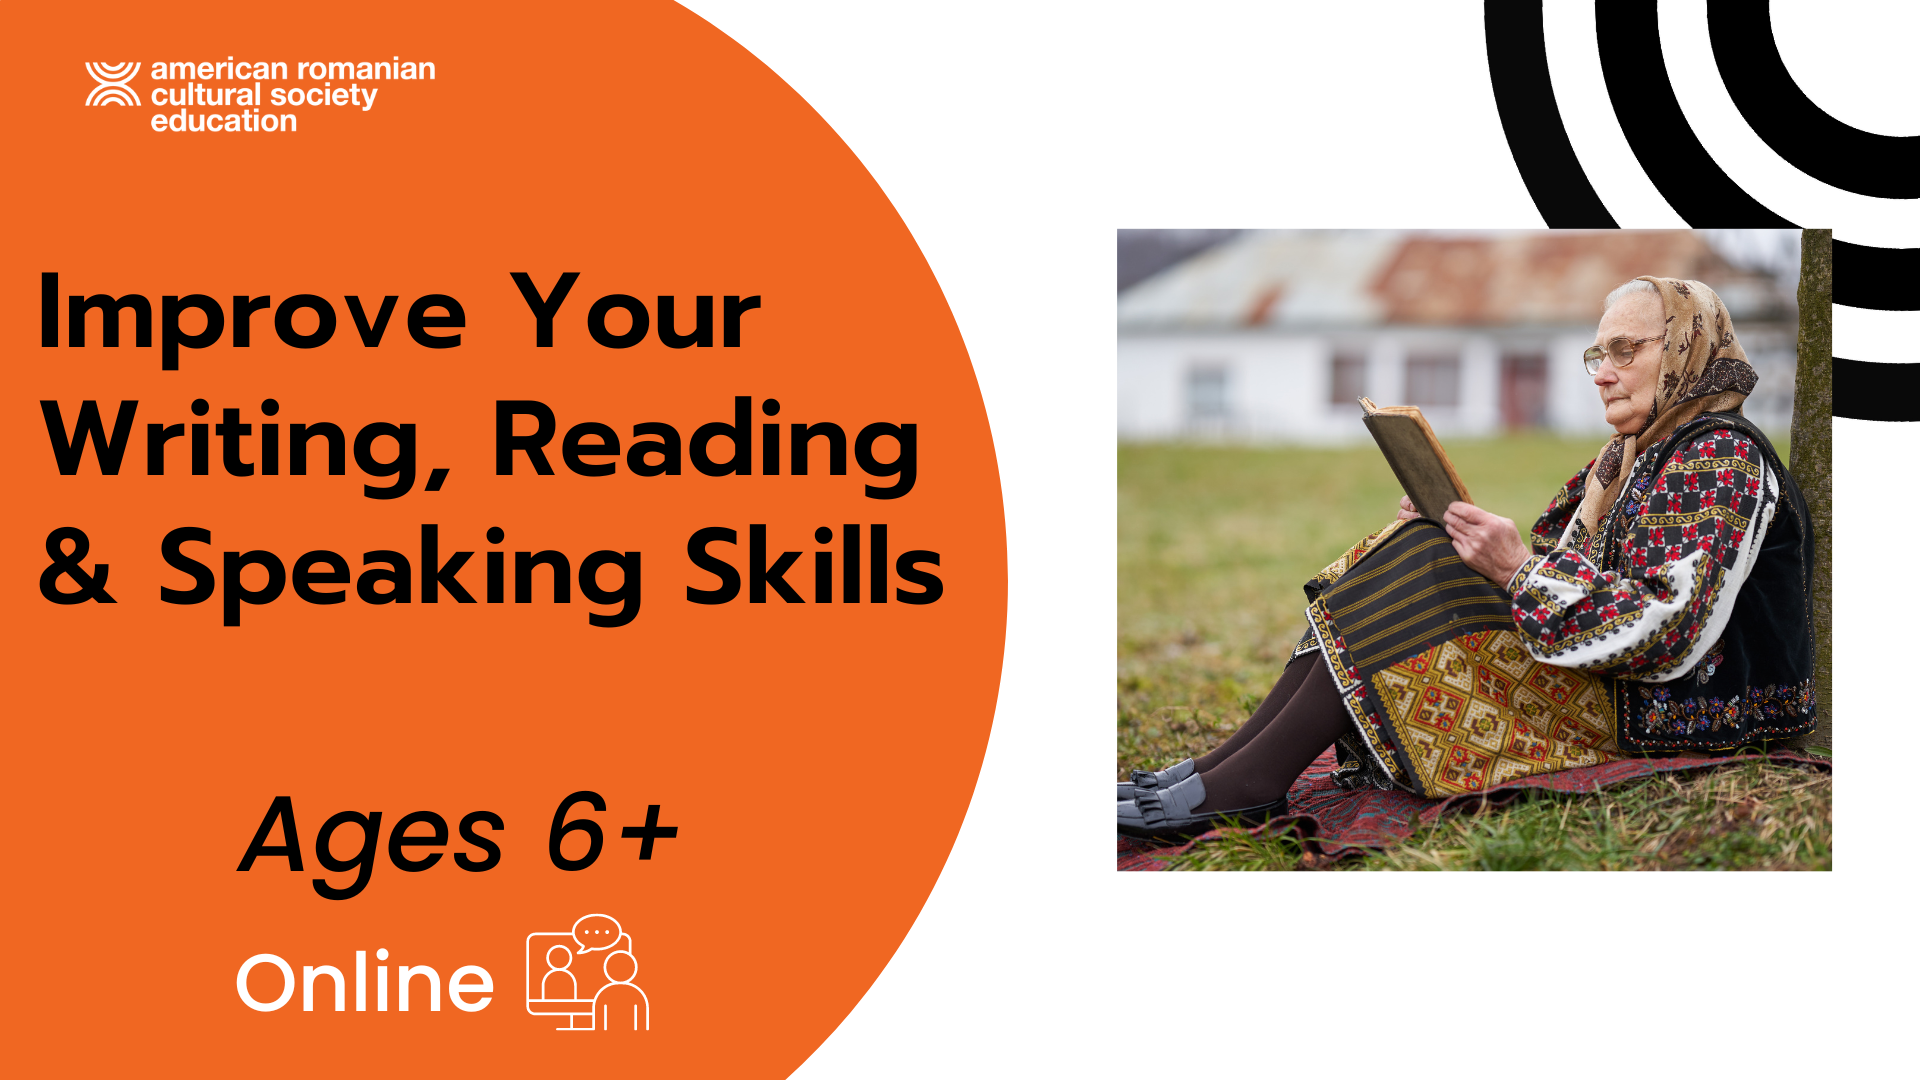 Improve Your Writing, Reading and Speaking Skills (ages 6+)